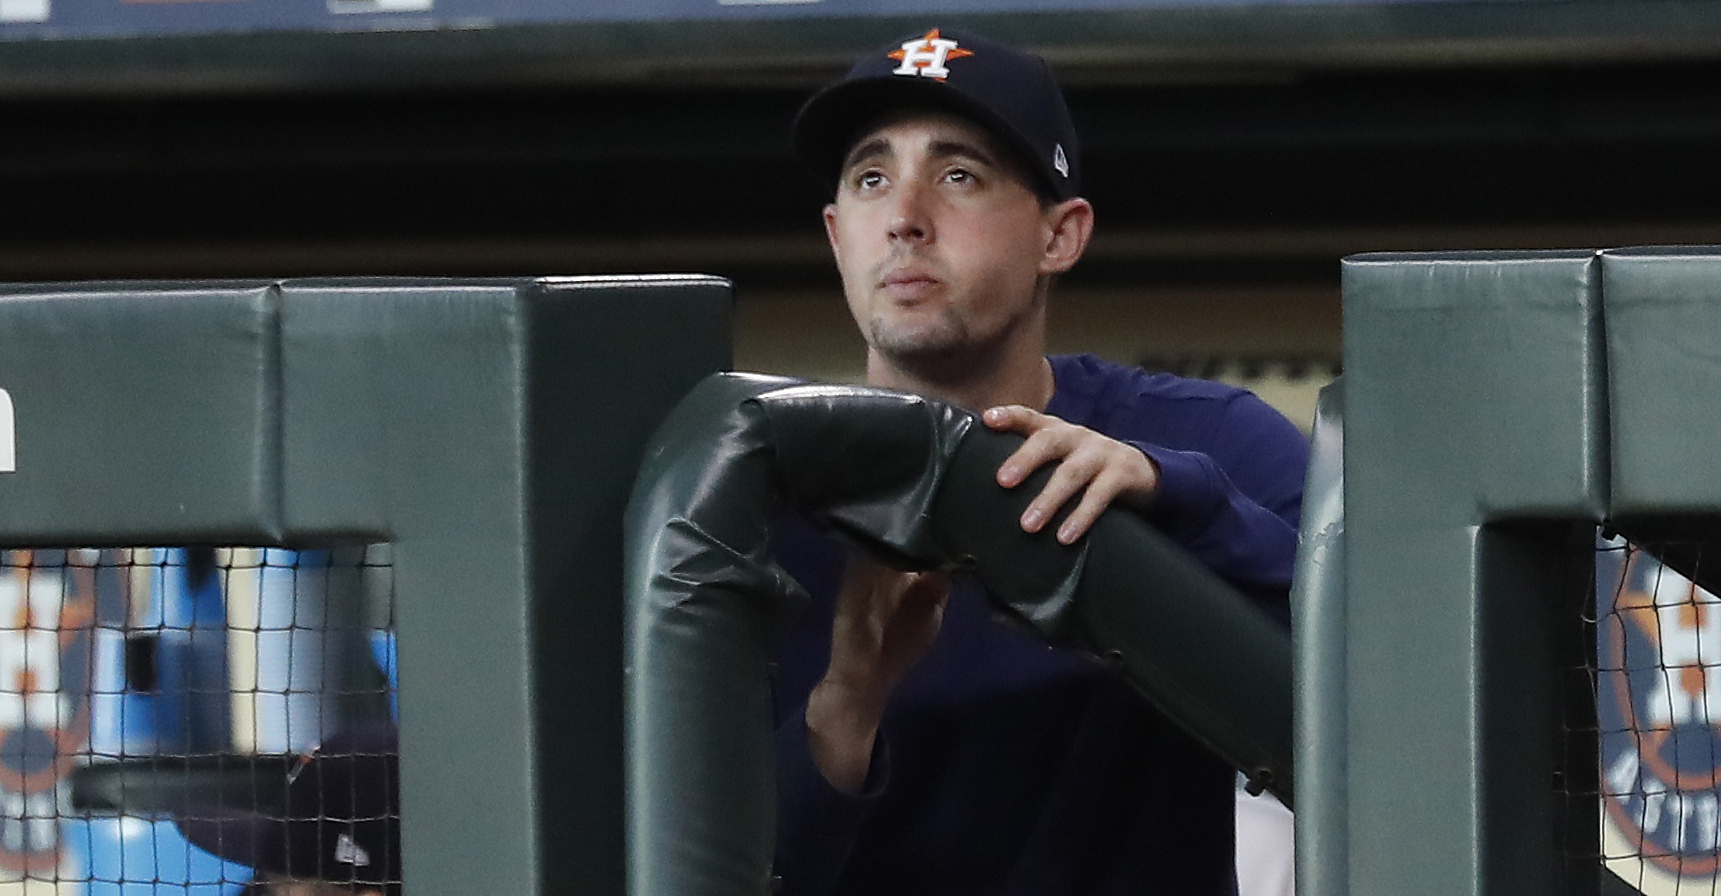 Aaron Sanchez's Astros future in question after surgery